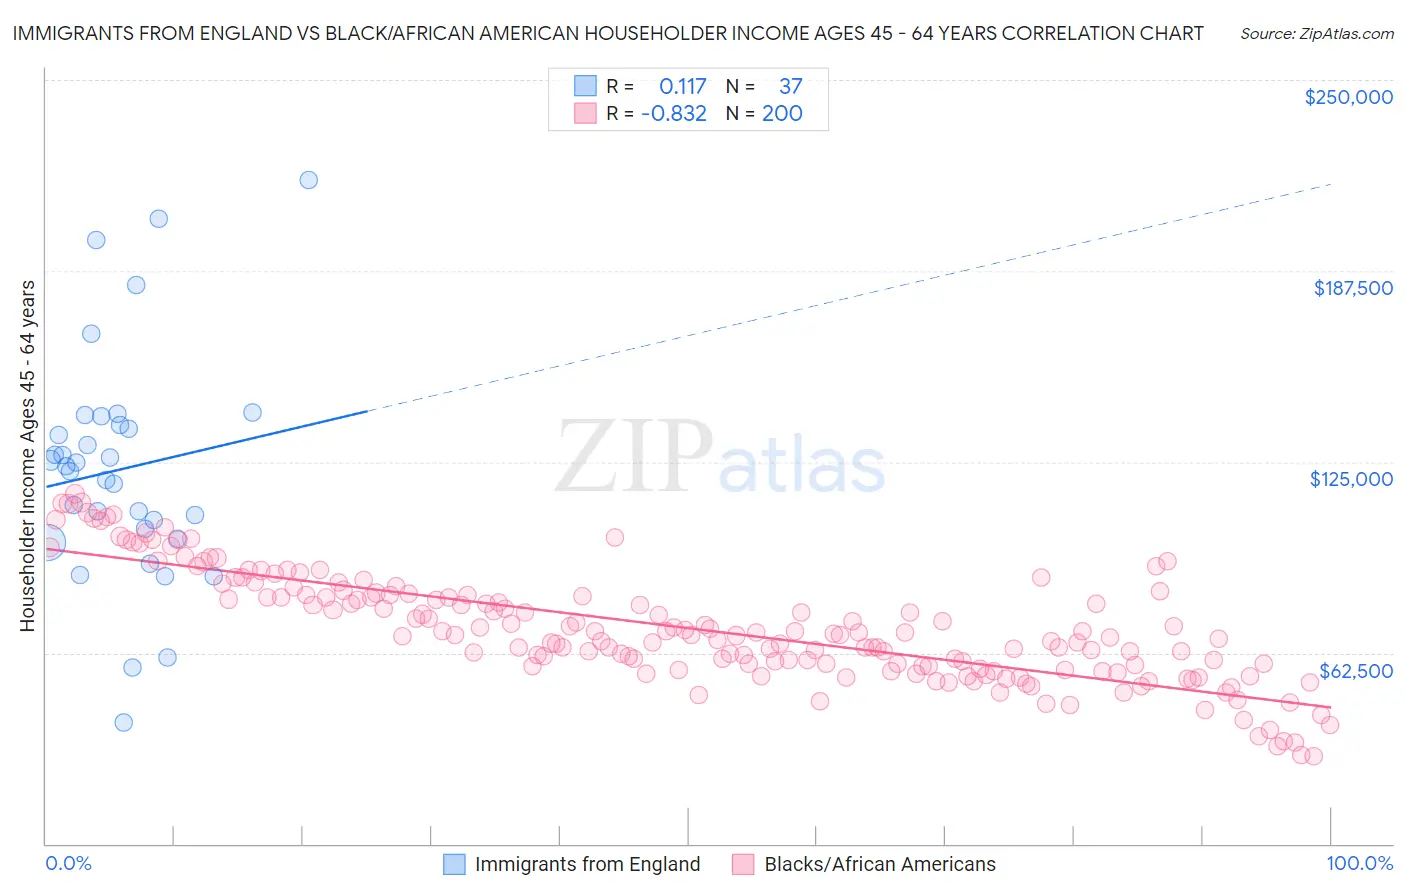 Immigrants from England vs Black/African American Householder Income Ages 45 - 64 years